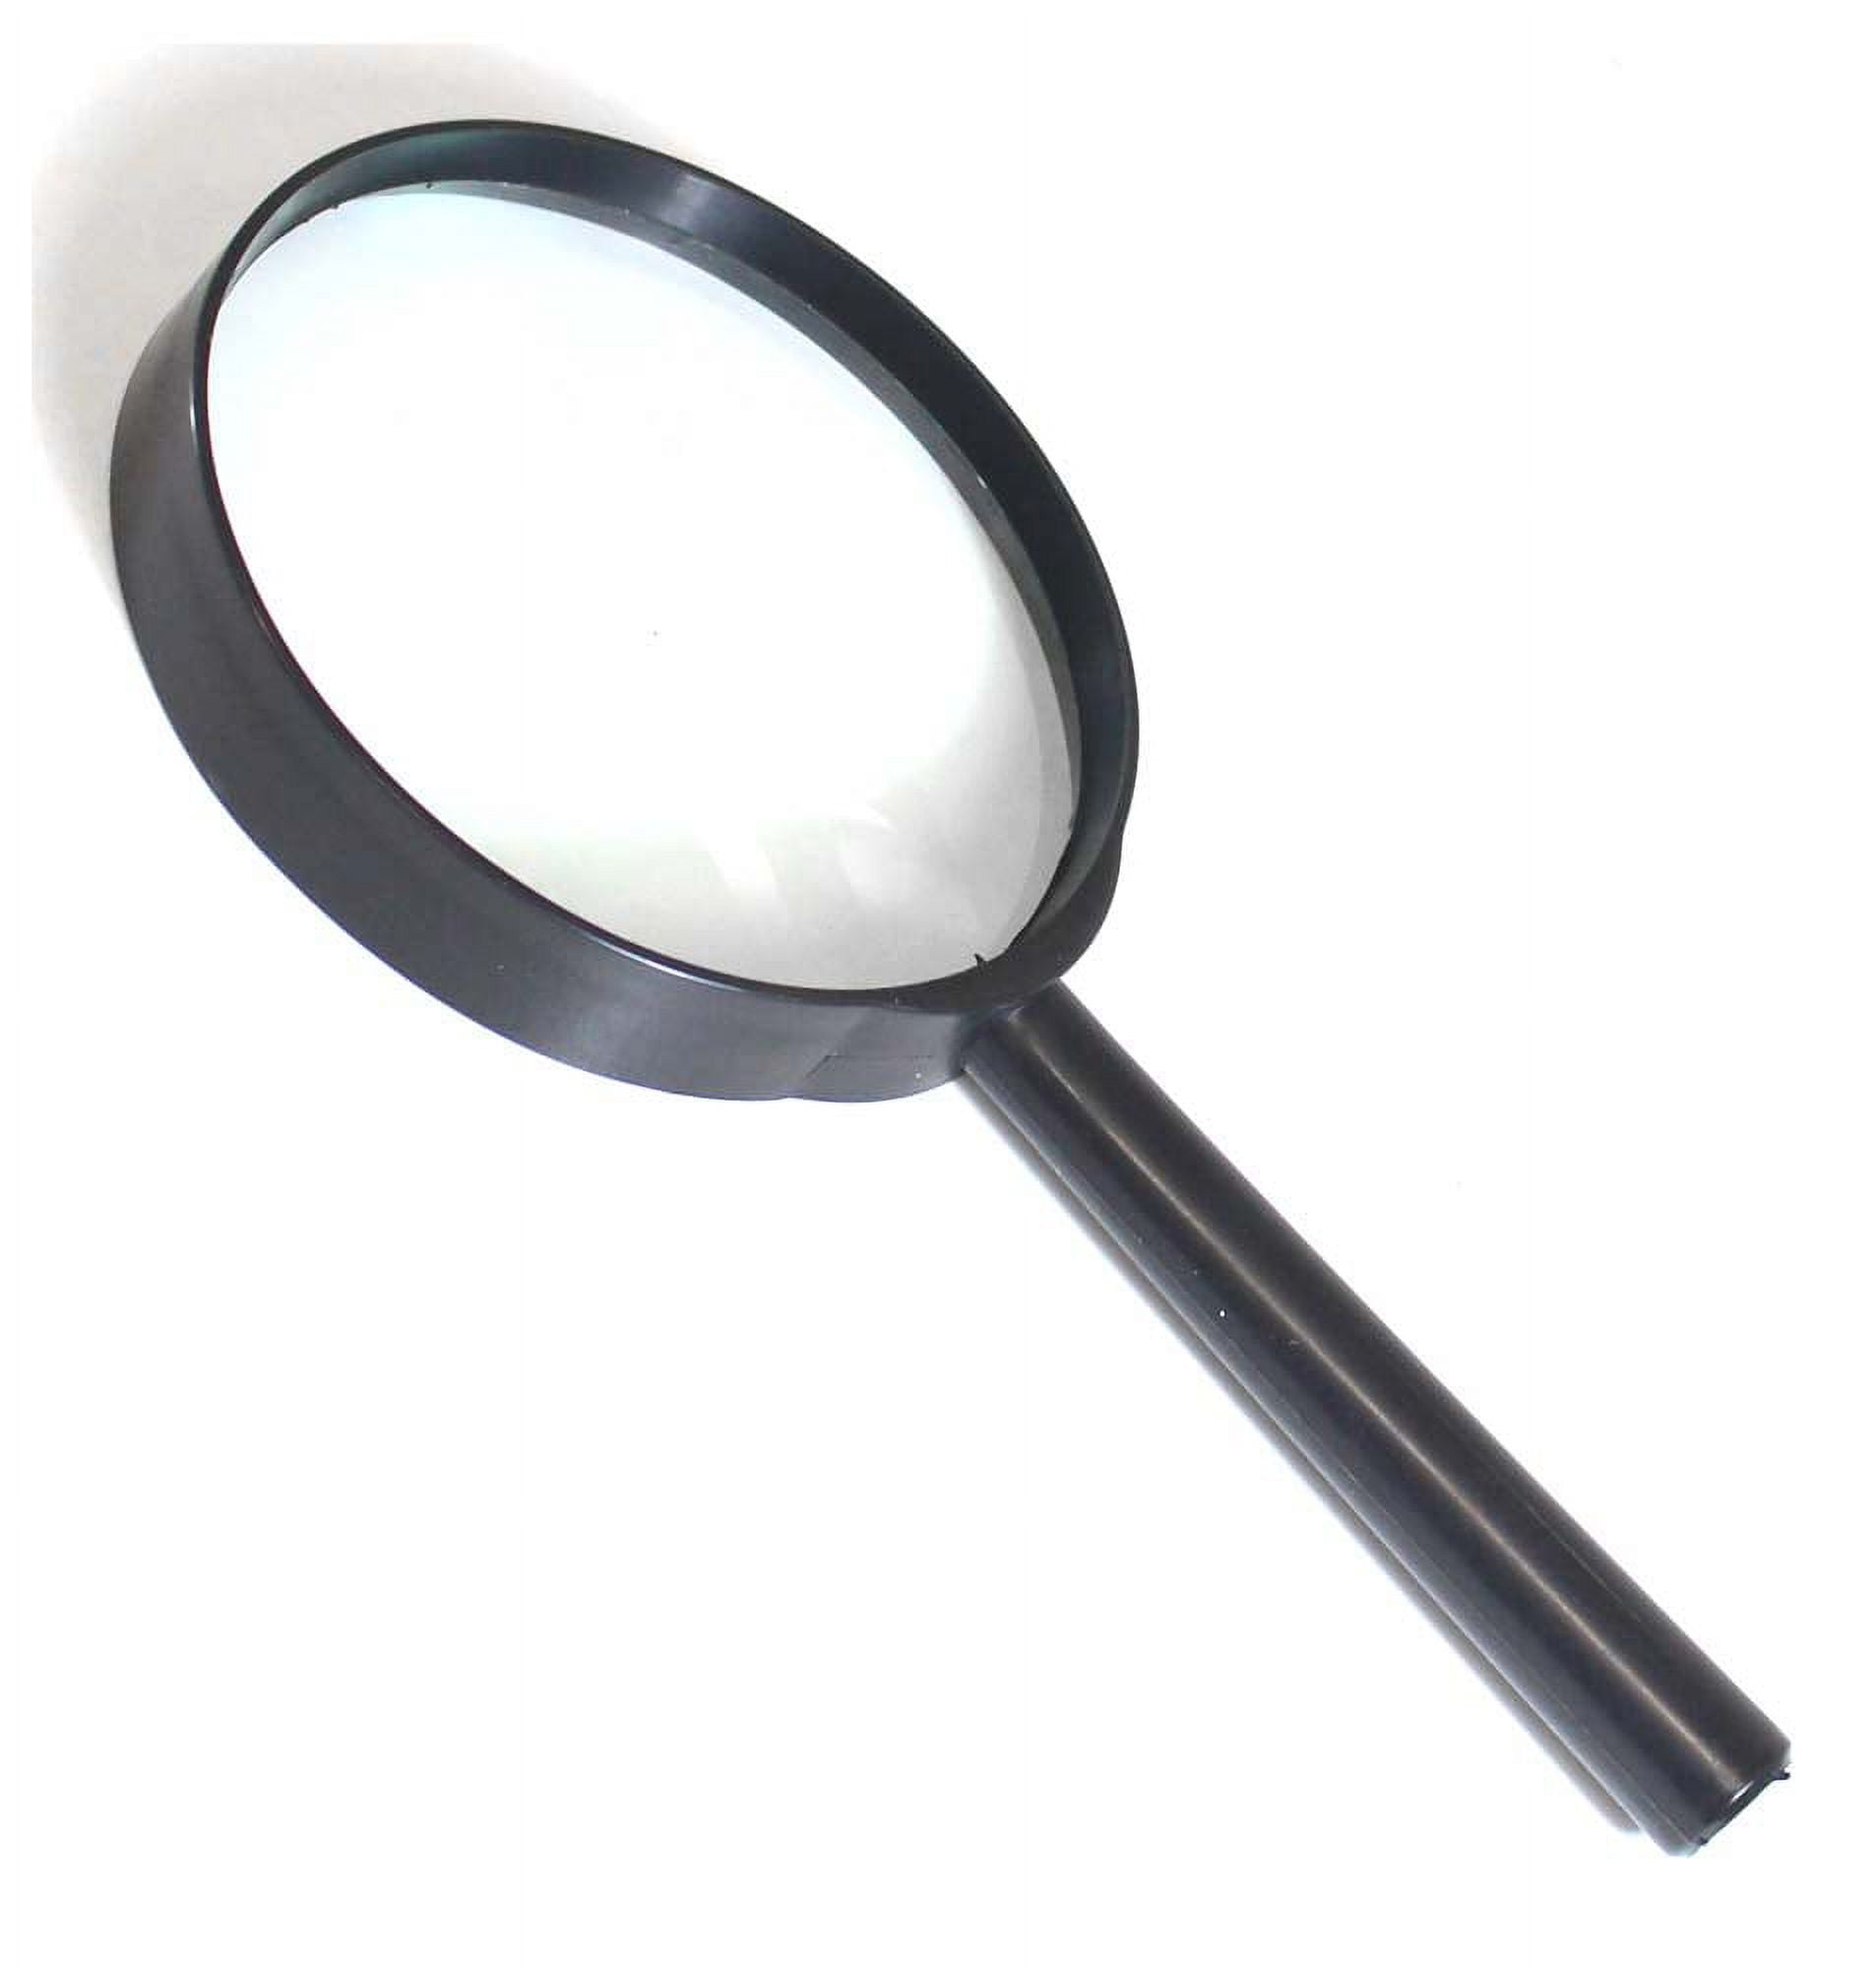 ZEISS Magnifying glass K 5.0X/235 telescope magnifier for KS and KF head  magnifiers